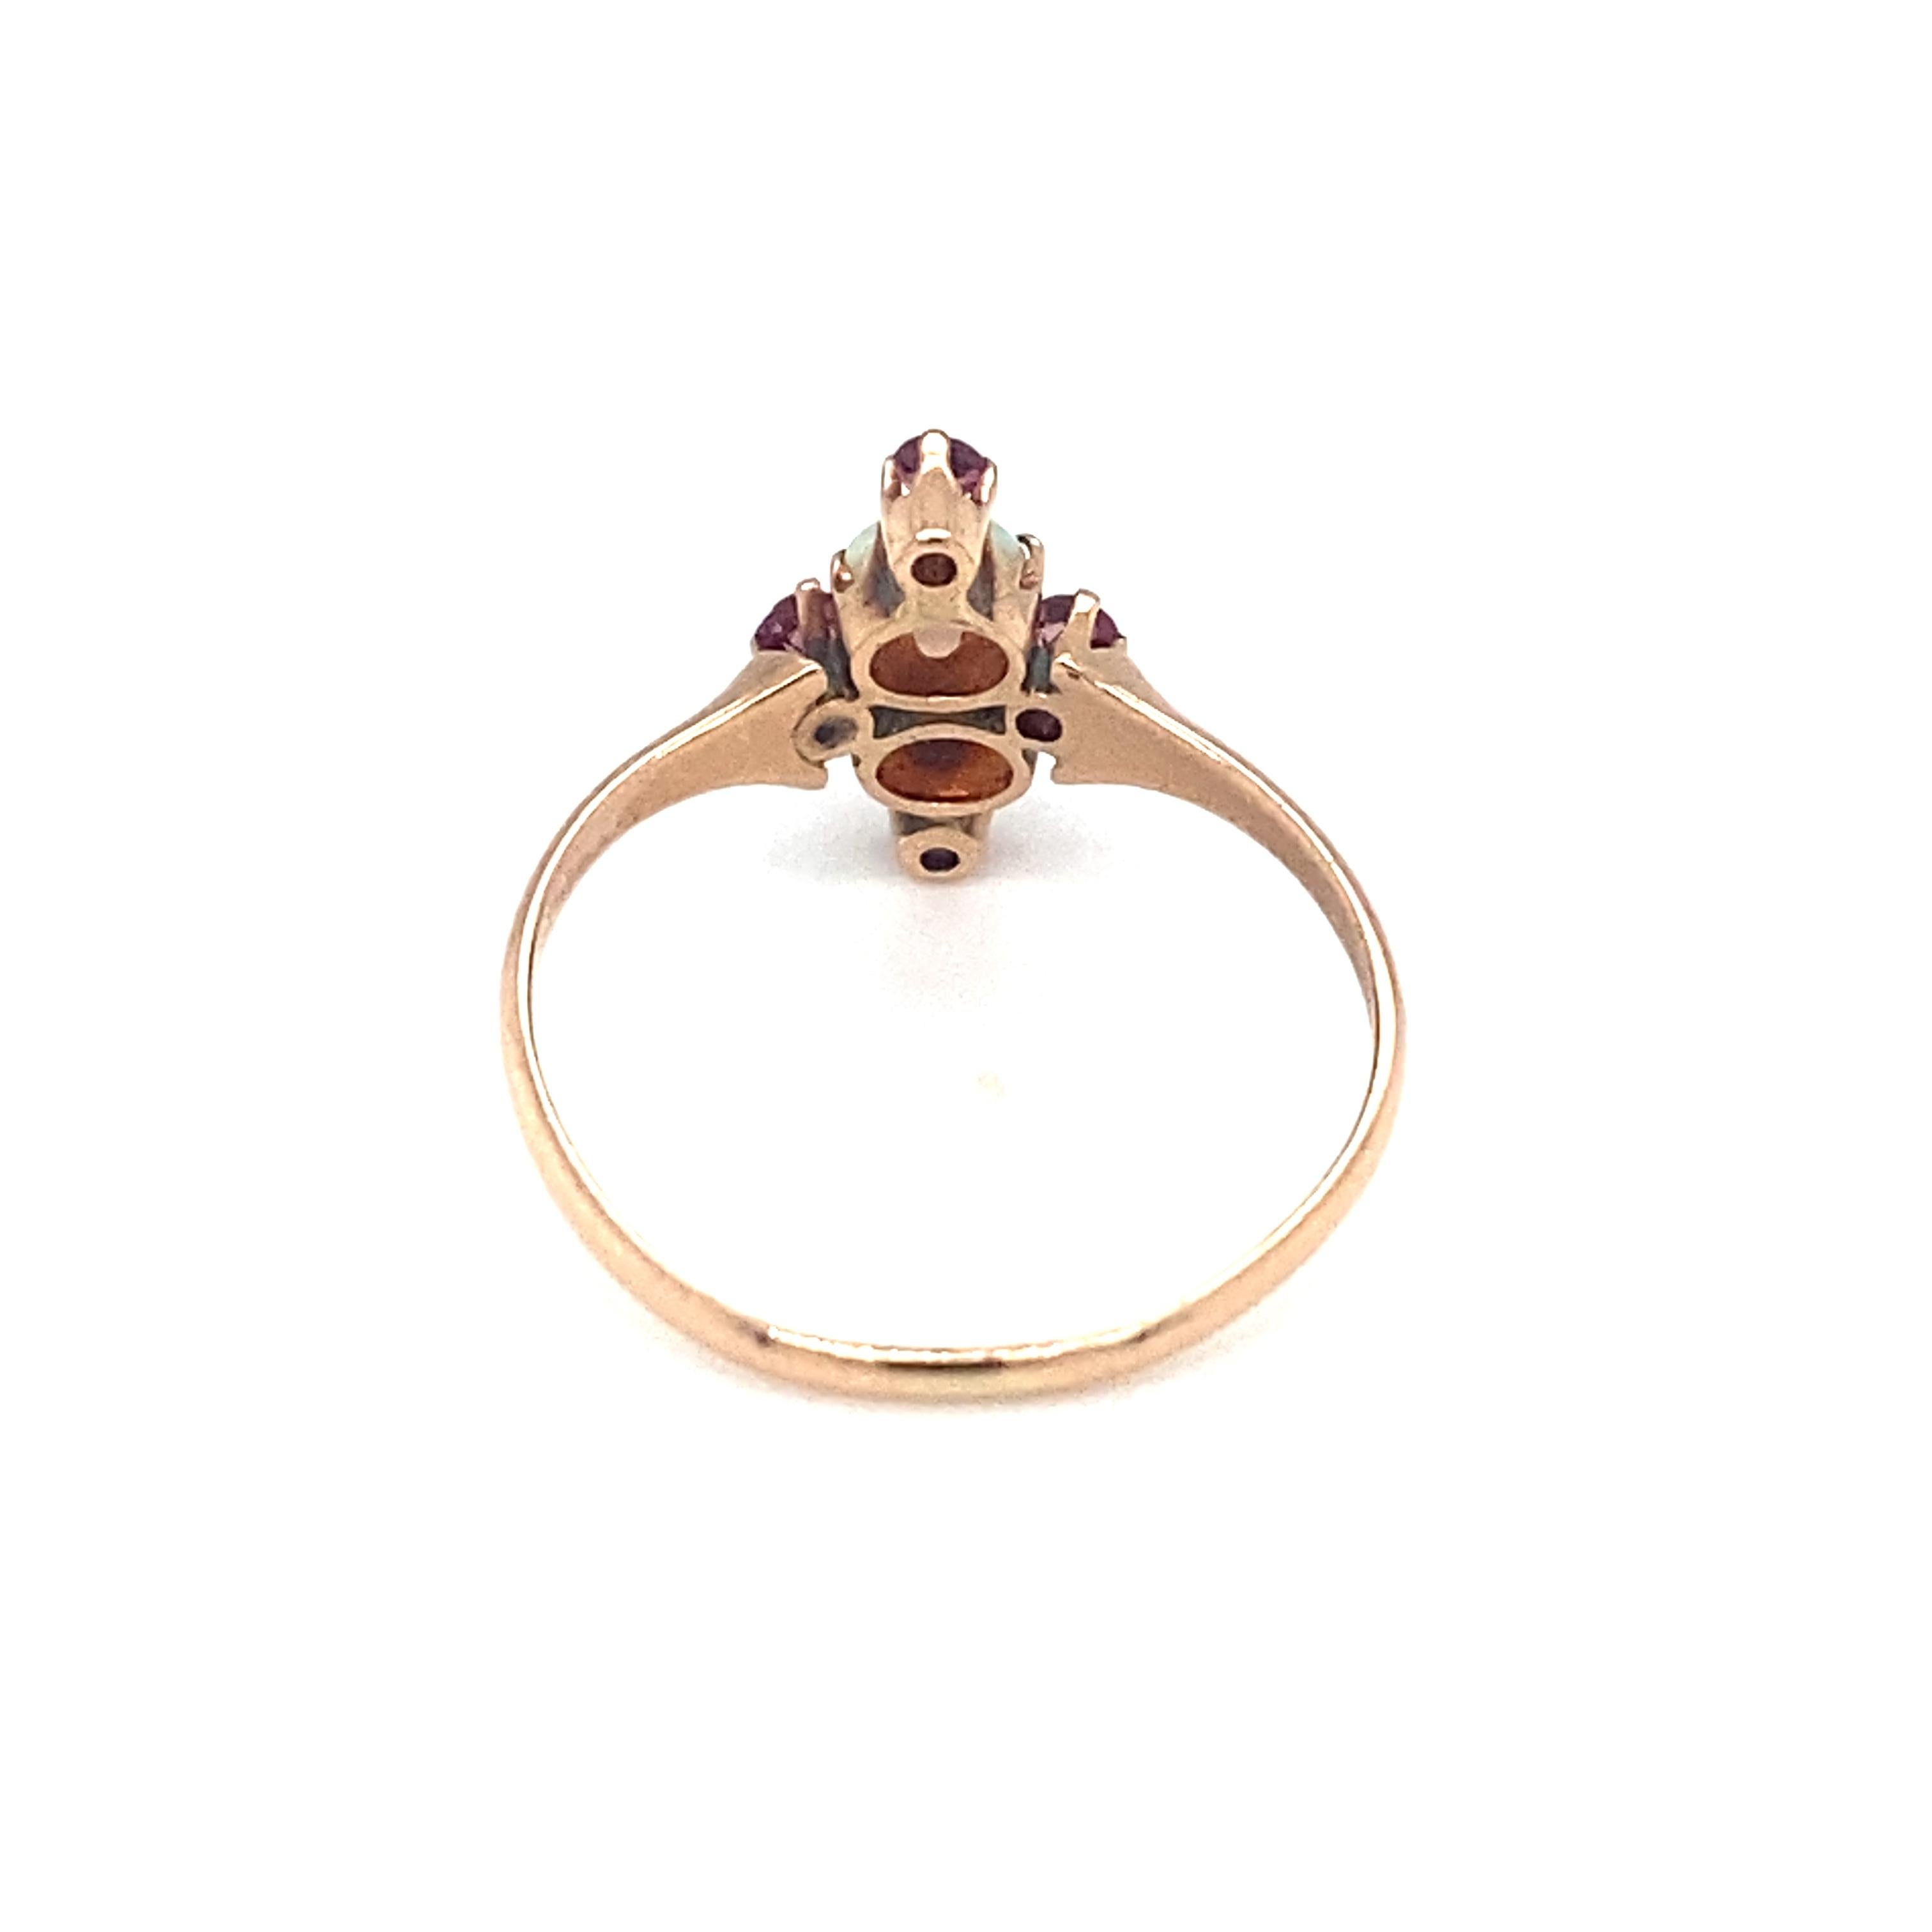 Item Details: This extremely unique antique ring features pink sapphires from Sri Lanka and opals from Ethiopia. It dates back to the 1890s, later Victorian era and is crafted in 9 Karat Yellow Gold. Dainty and unique, it features a beautiful and